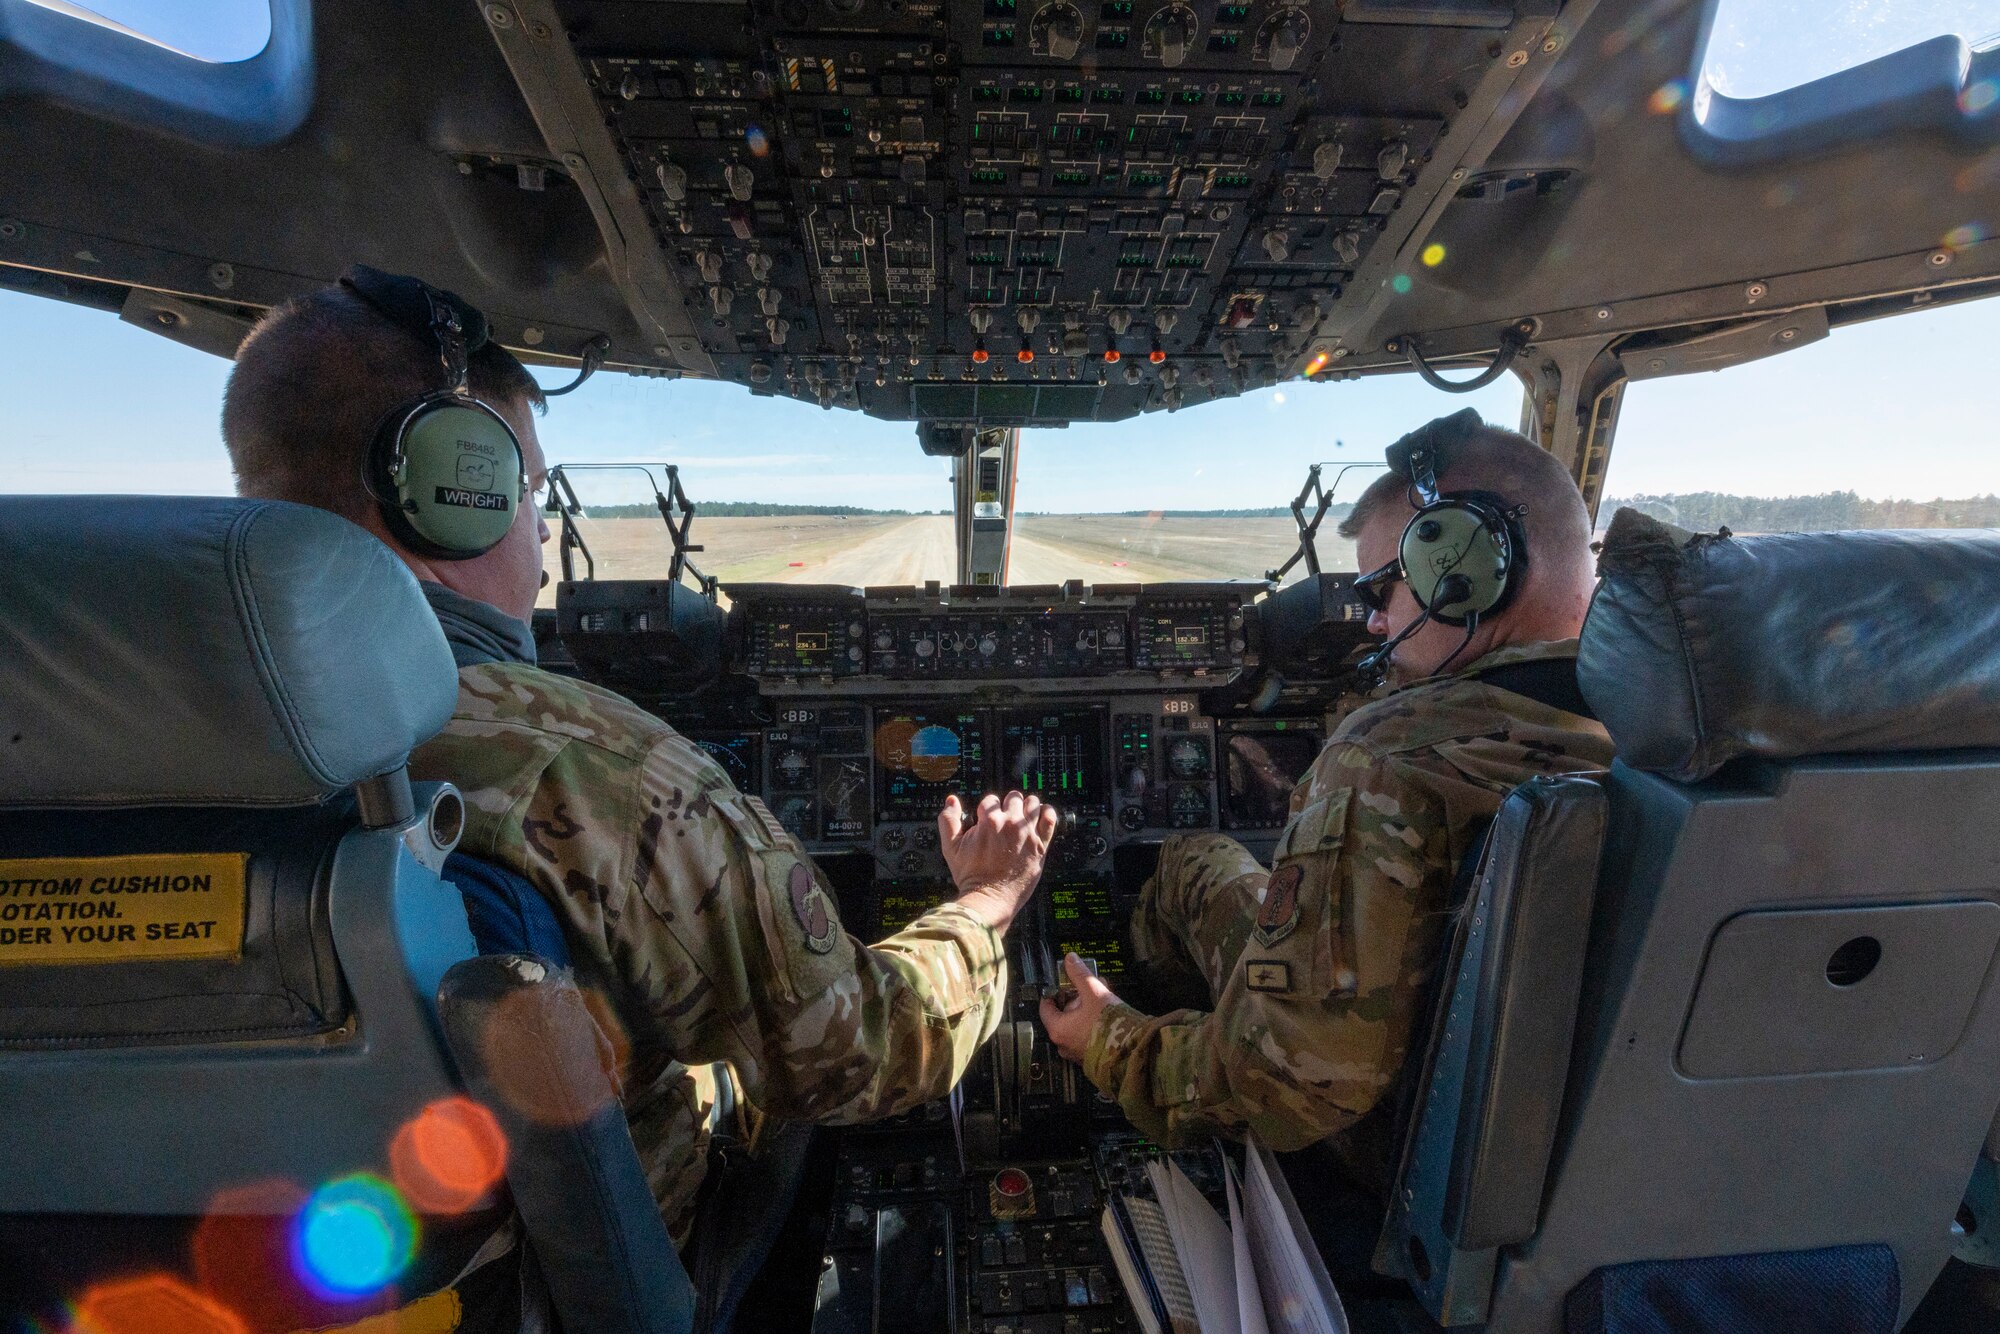 U.S. Air Force Lt. Col. Randall Wright and Maj. David Groom both pilots with the 167th Airlift Squadron await permission to takeoff on a semi-prepared runway during exercise Green Flag Little Rock 22-03 at Ft. Polk, Louisiana, Jan. 13, 2022. GFLR 22-03 focused on three joint-accredited items: combat airlift; survival, evasion, resistance and escape; and aeromedical evacuation.